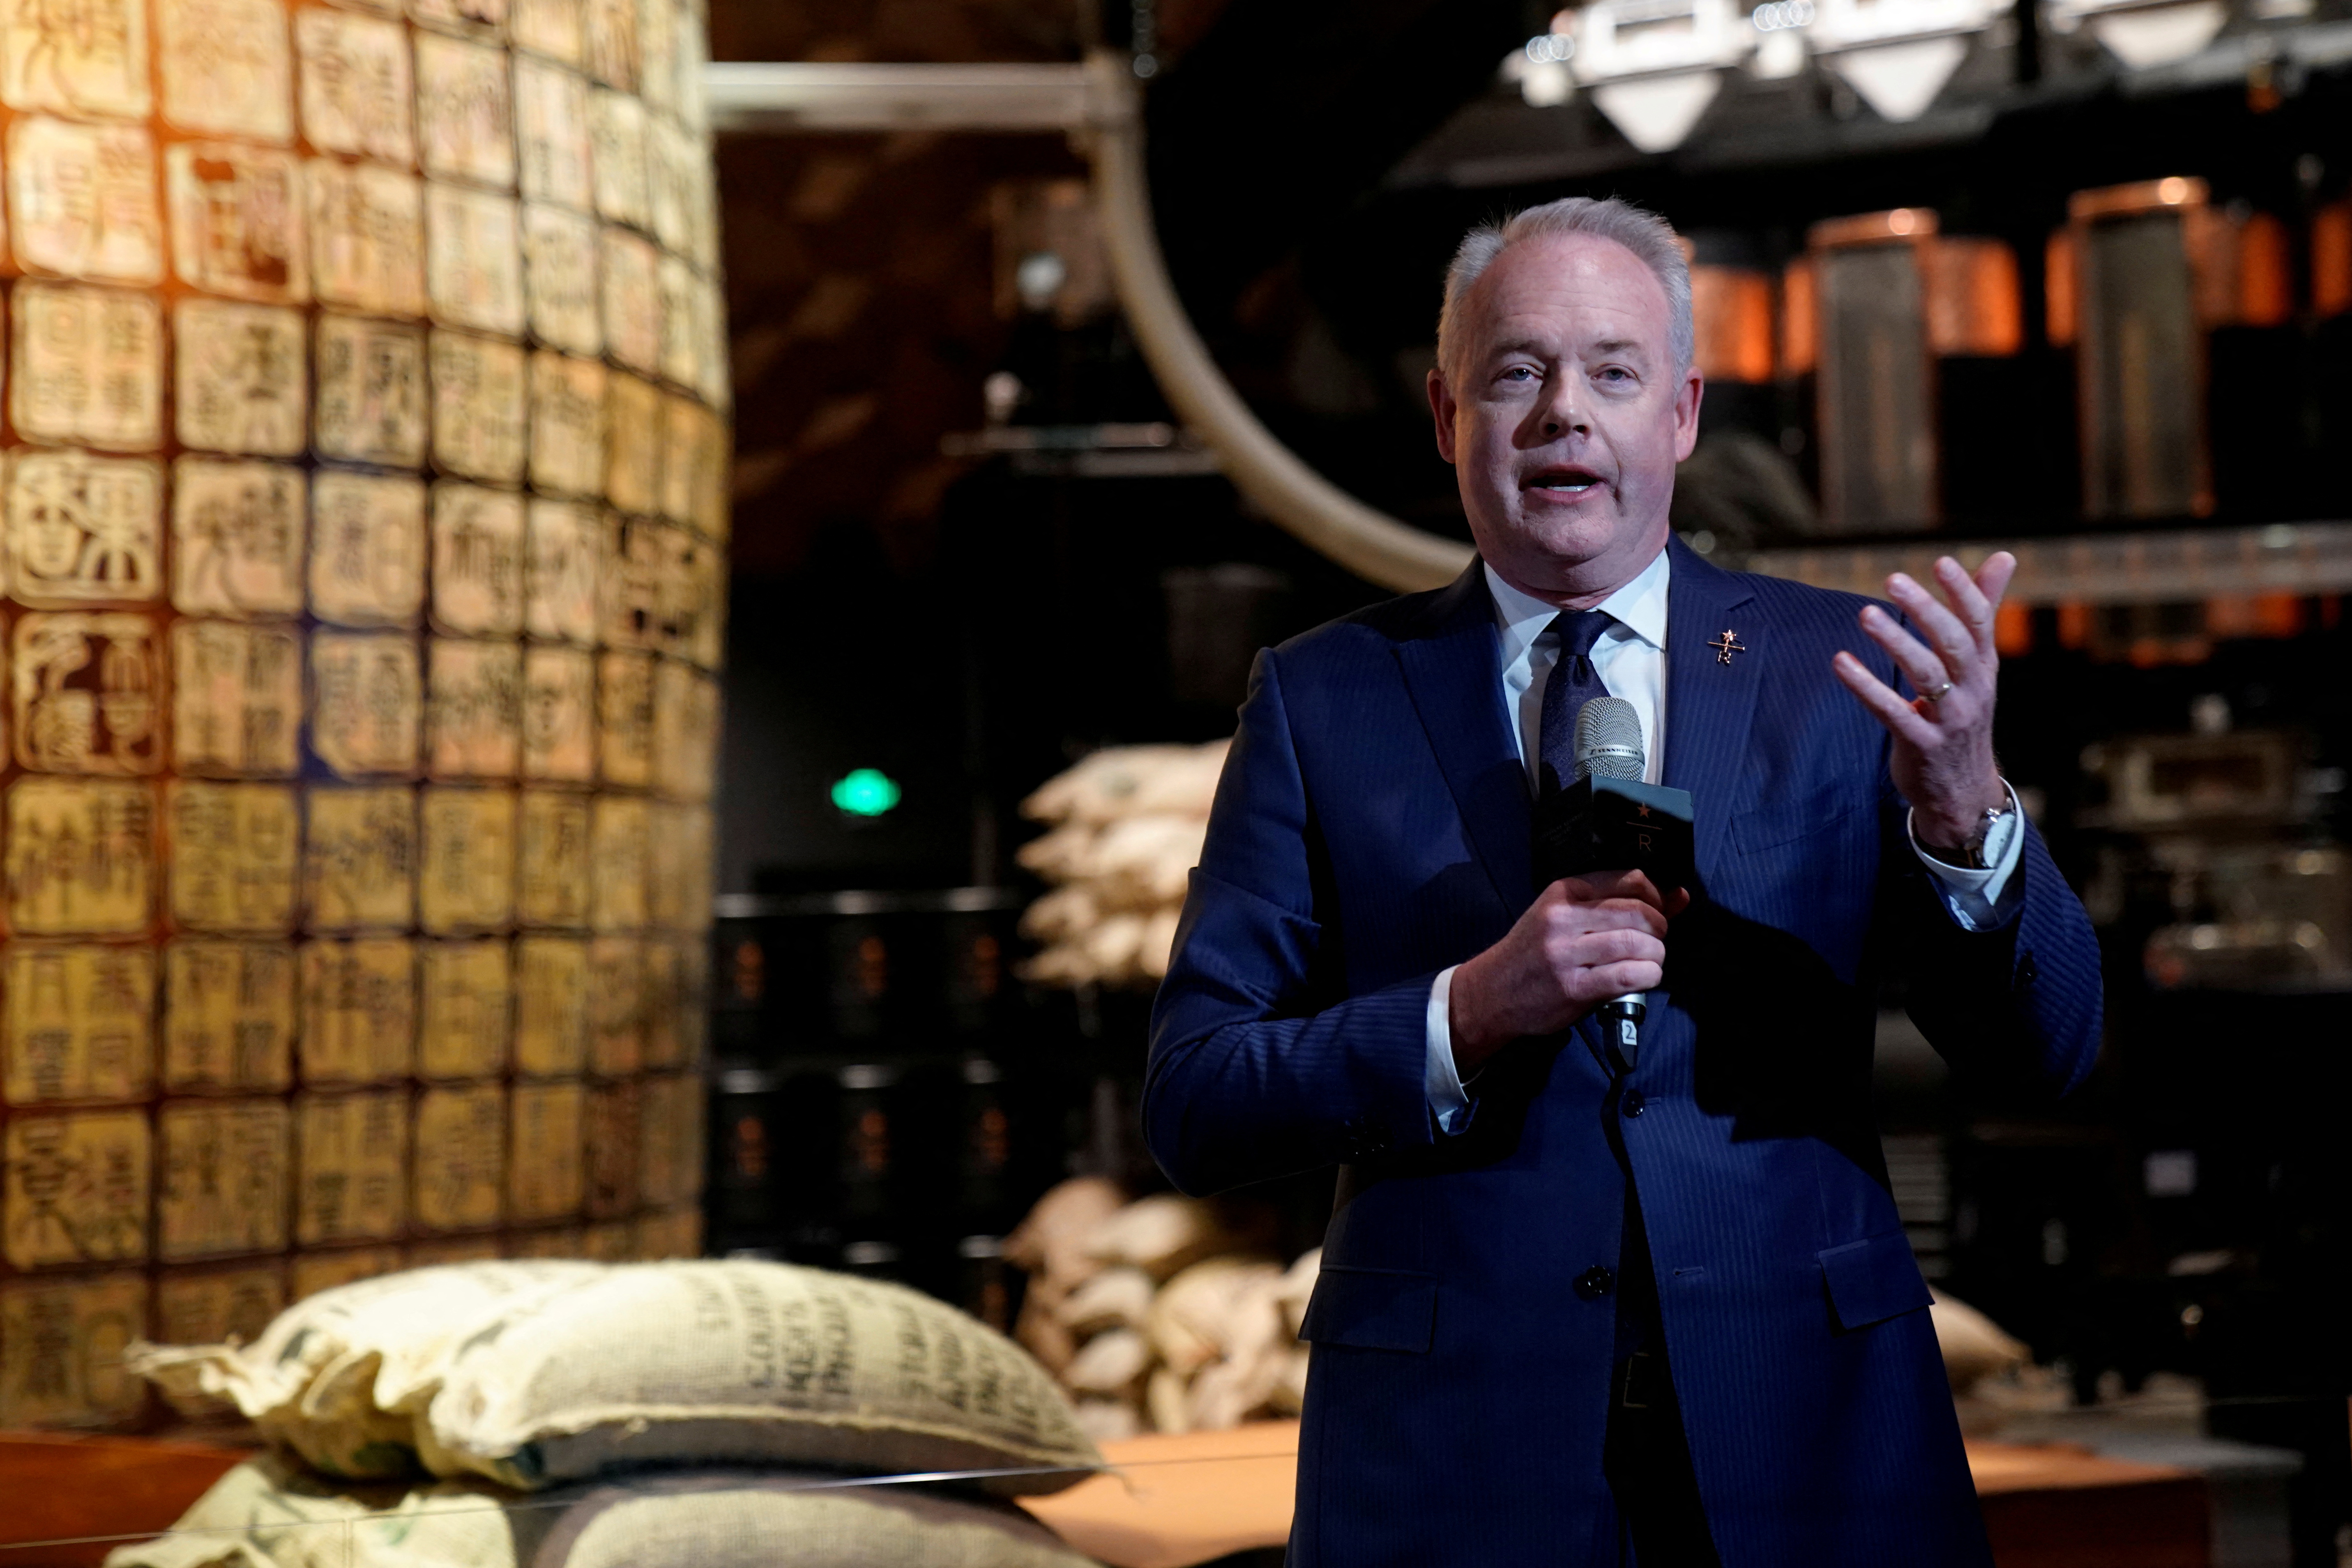 Starbucks CEO Kevin Johnson attends a press conference at the new Starbucks Reserve Roastery in Shanghai